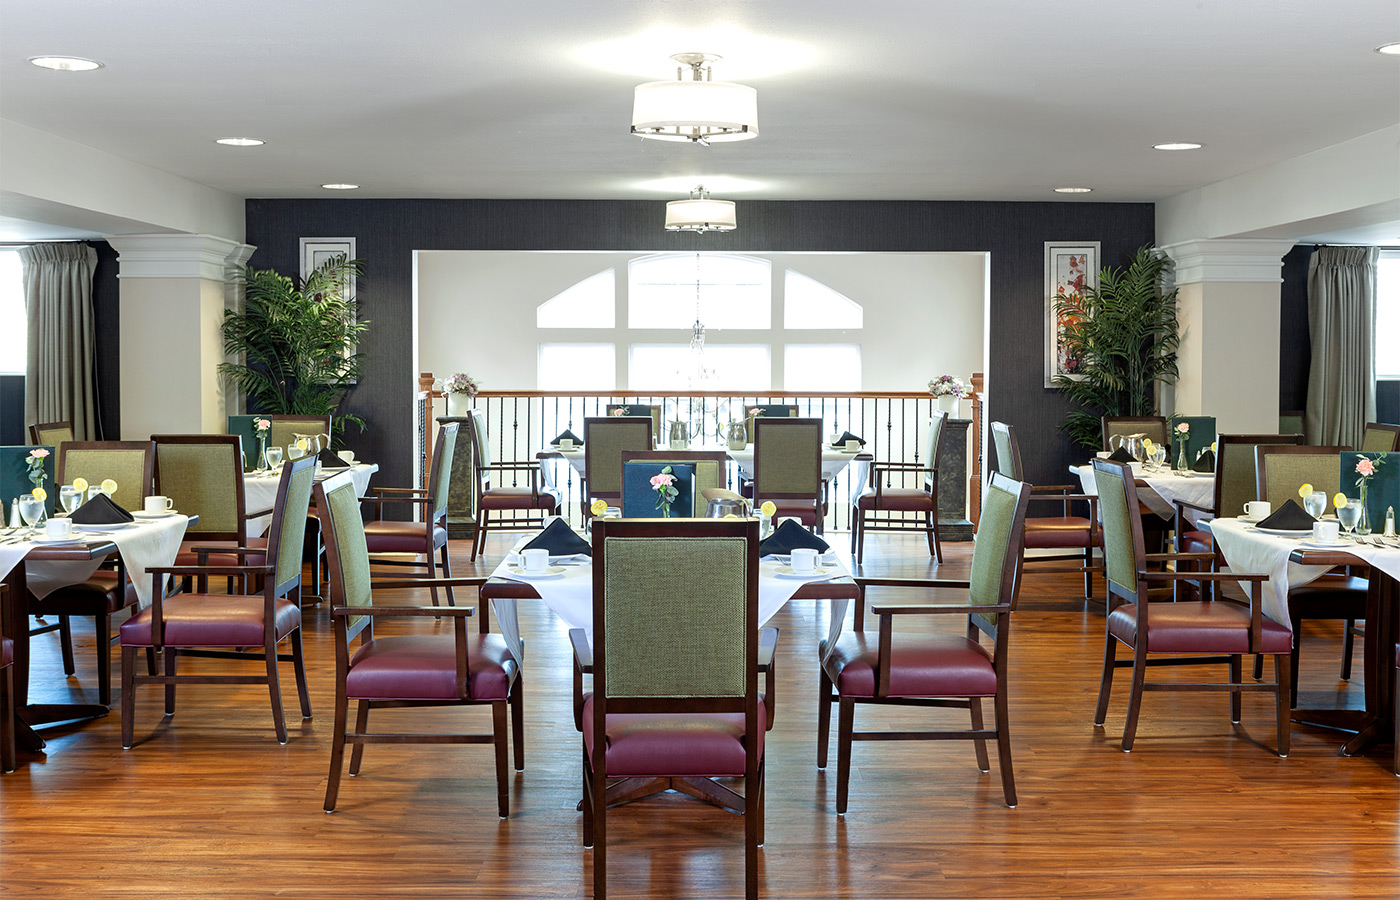 The dining room set for service.